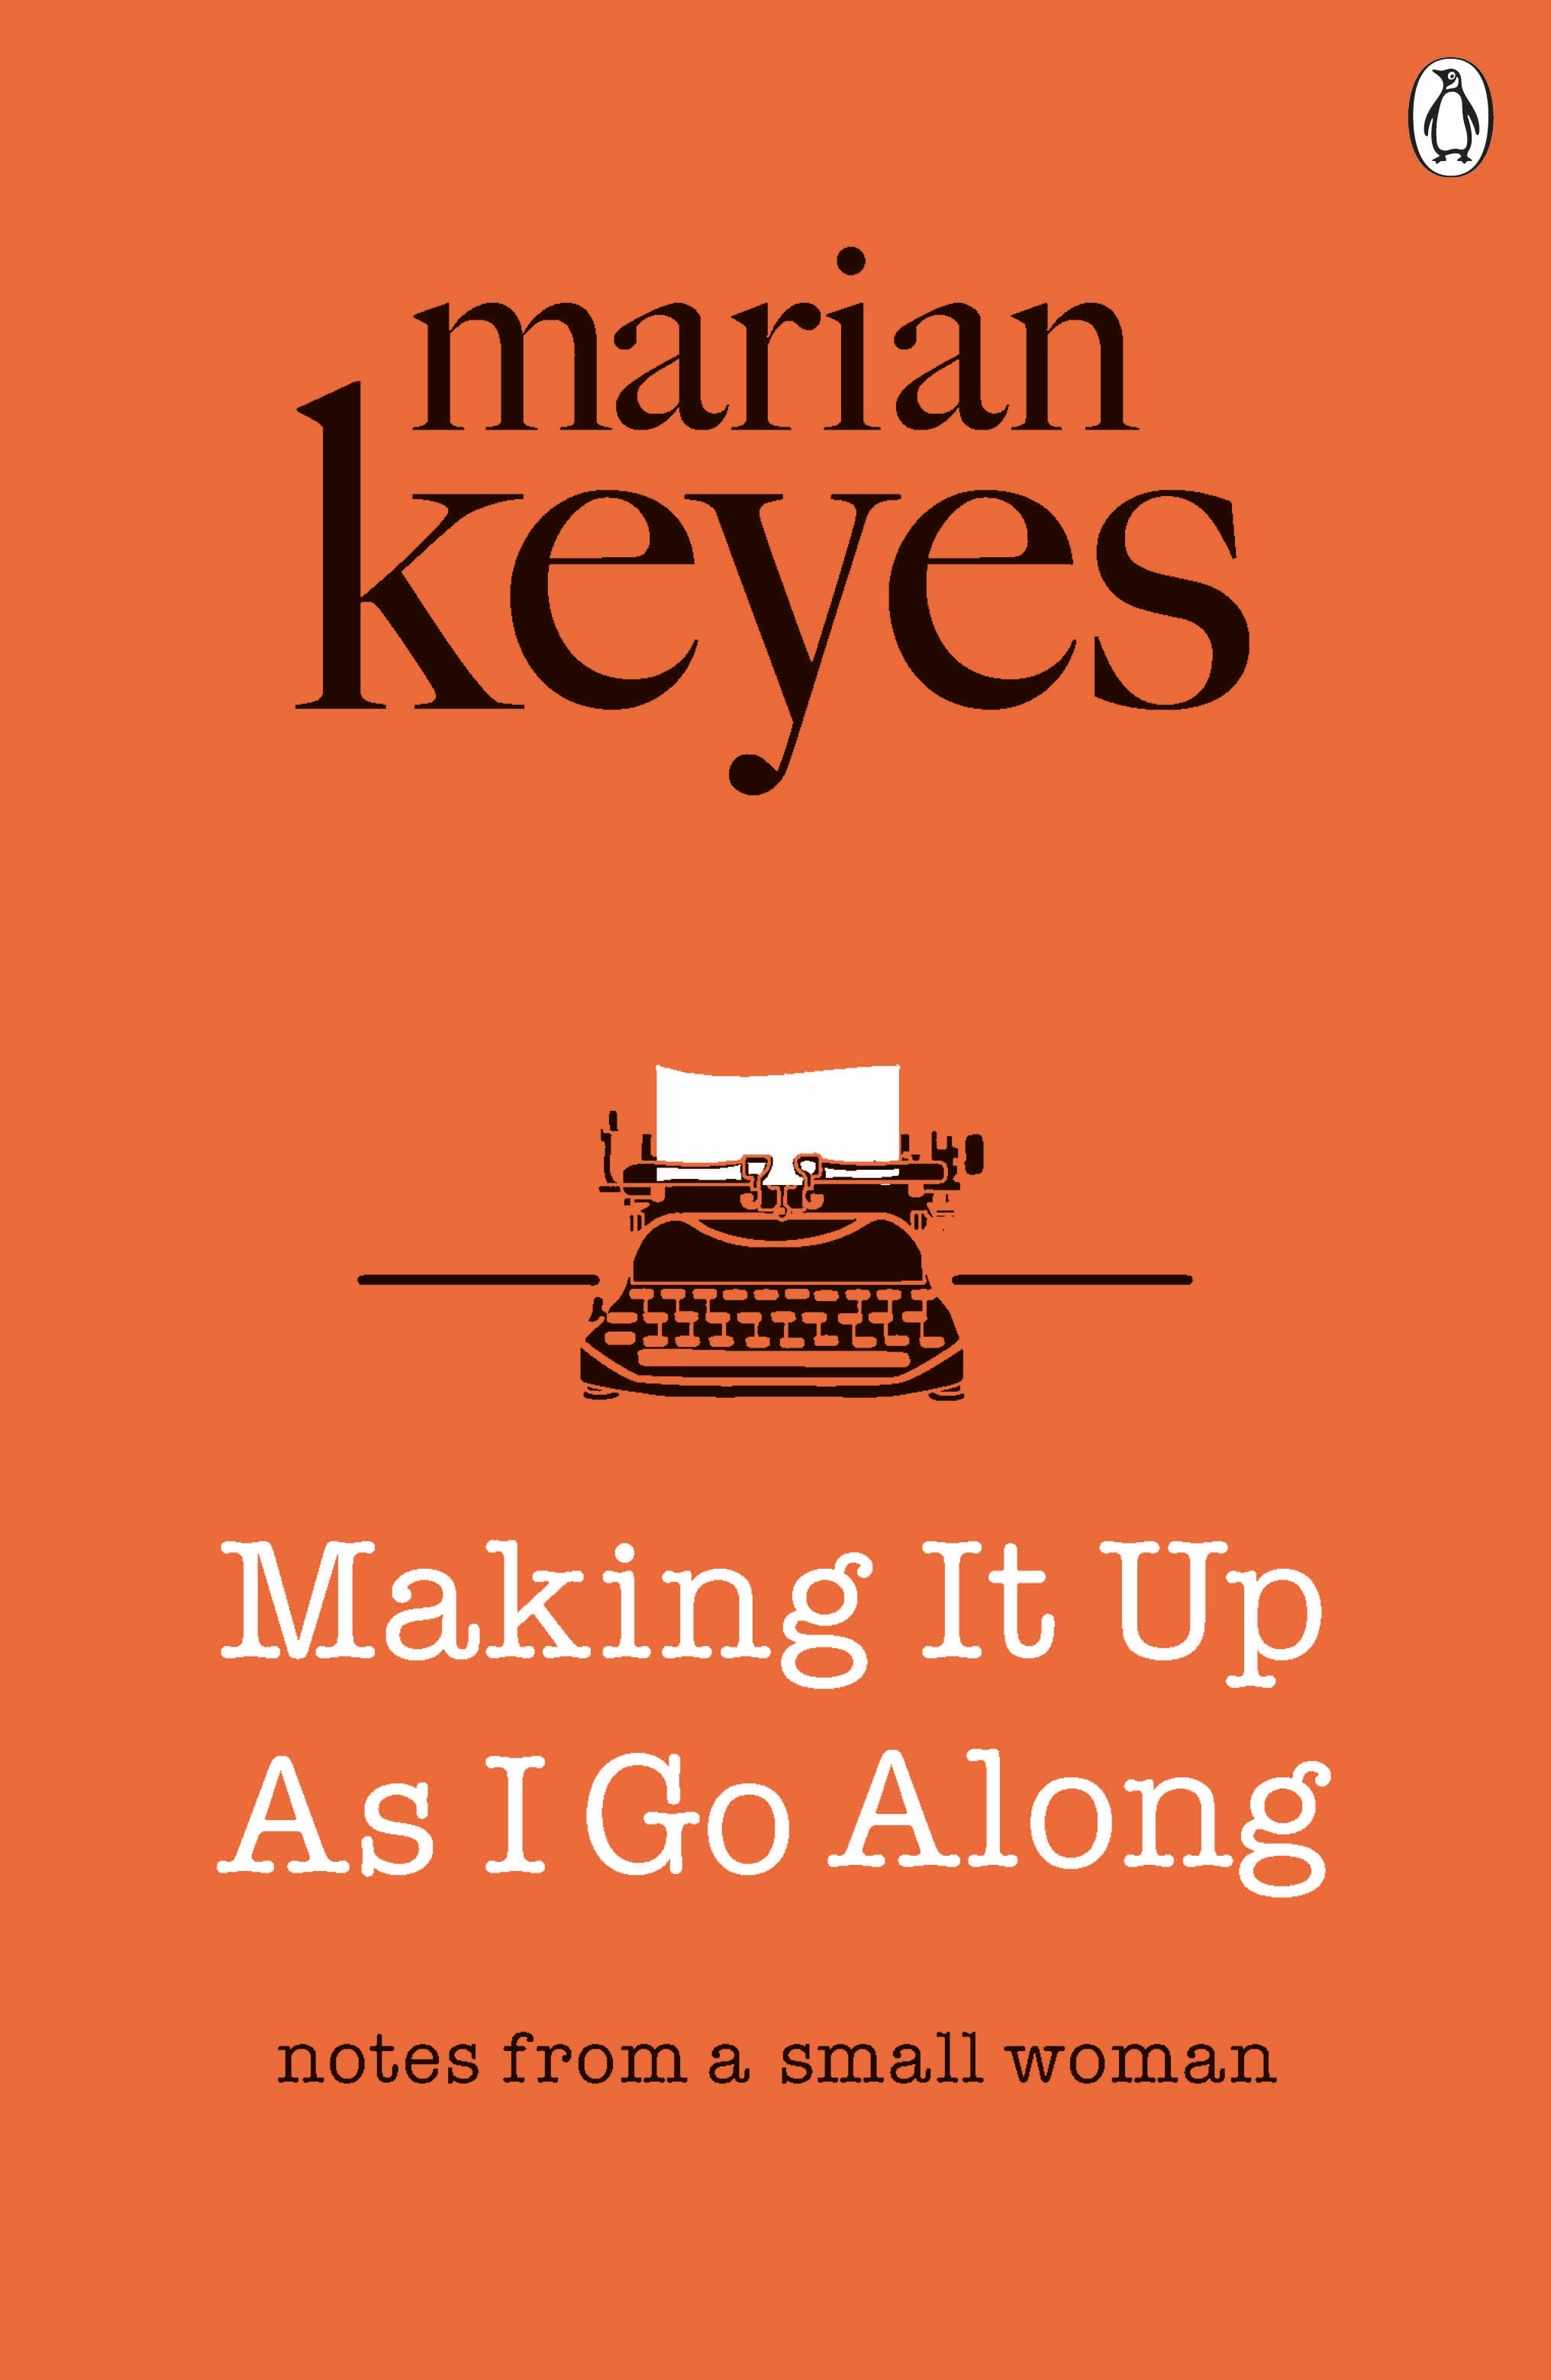 Book “Making It Up As I Go Along” by Marian Keyes — October 6, 2016